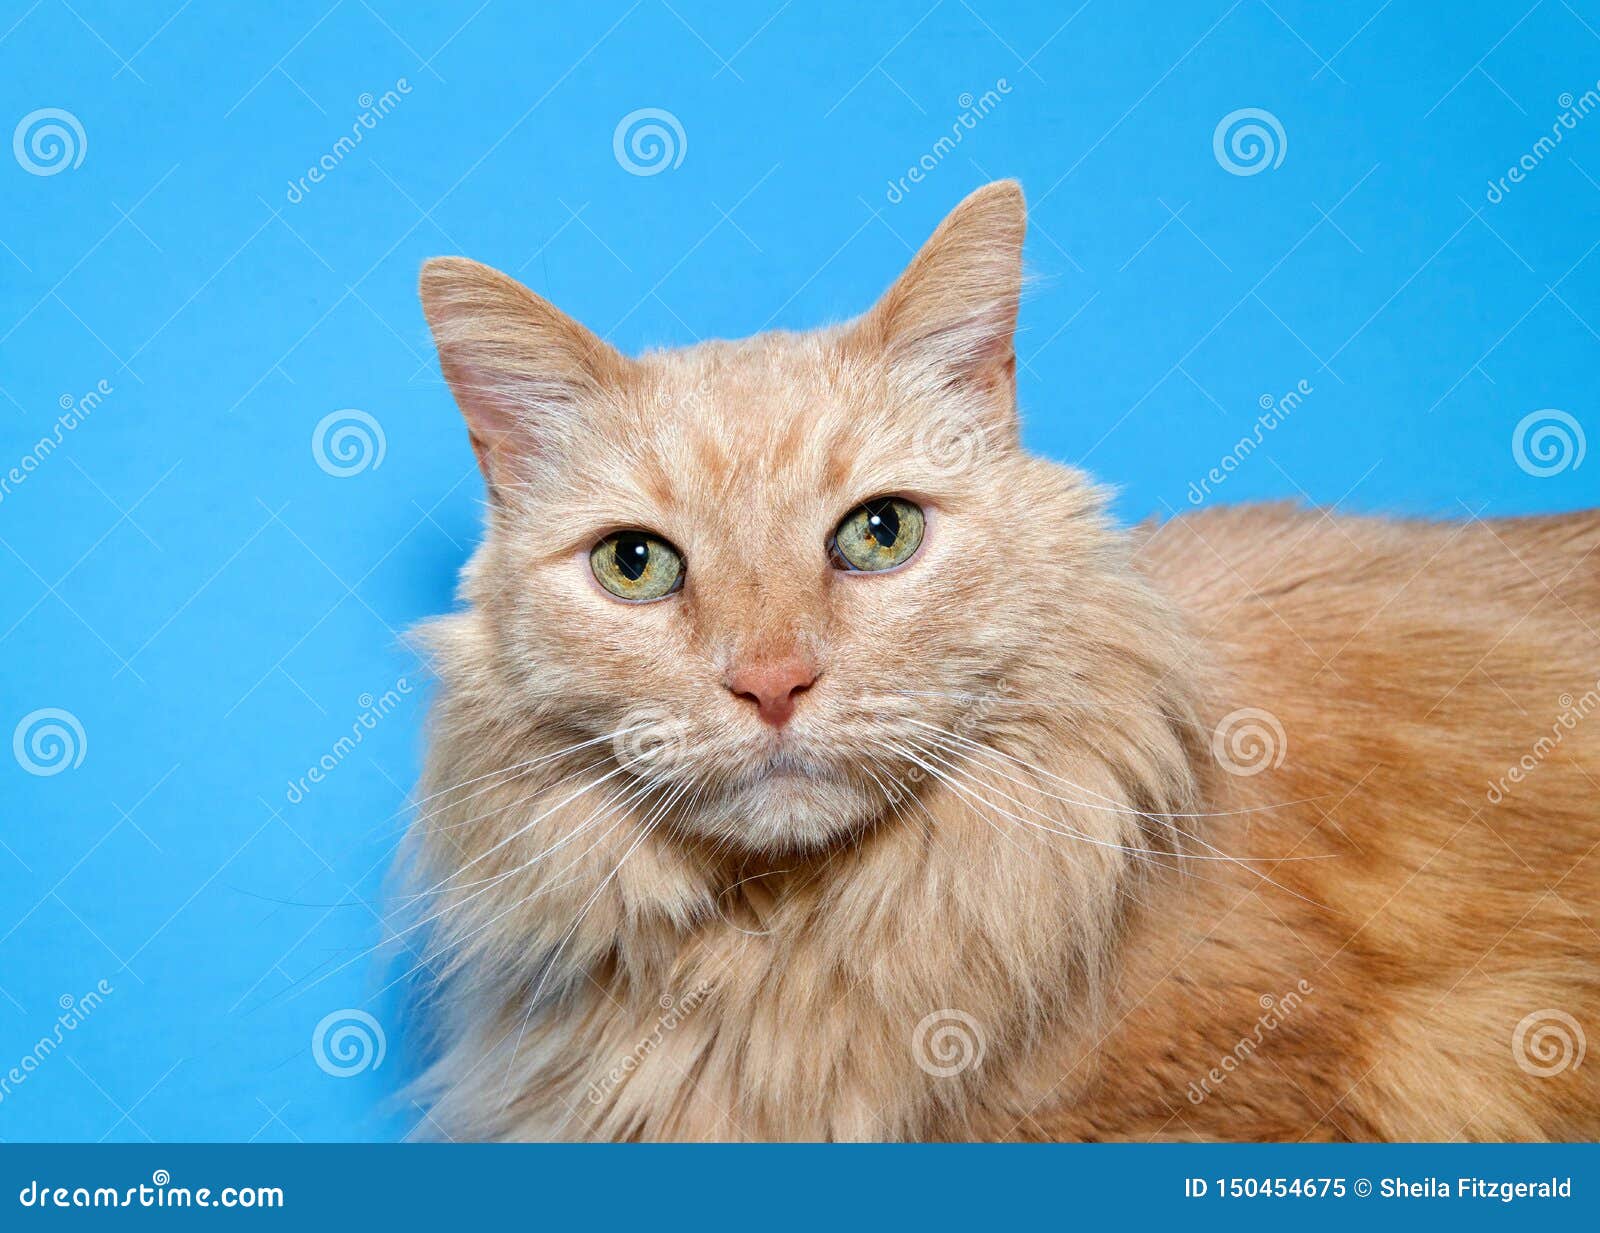 Portrait Of A Long Haired Orange Tabby Cat On Blue Stock Image Image Of Tabby Domestic